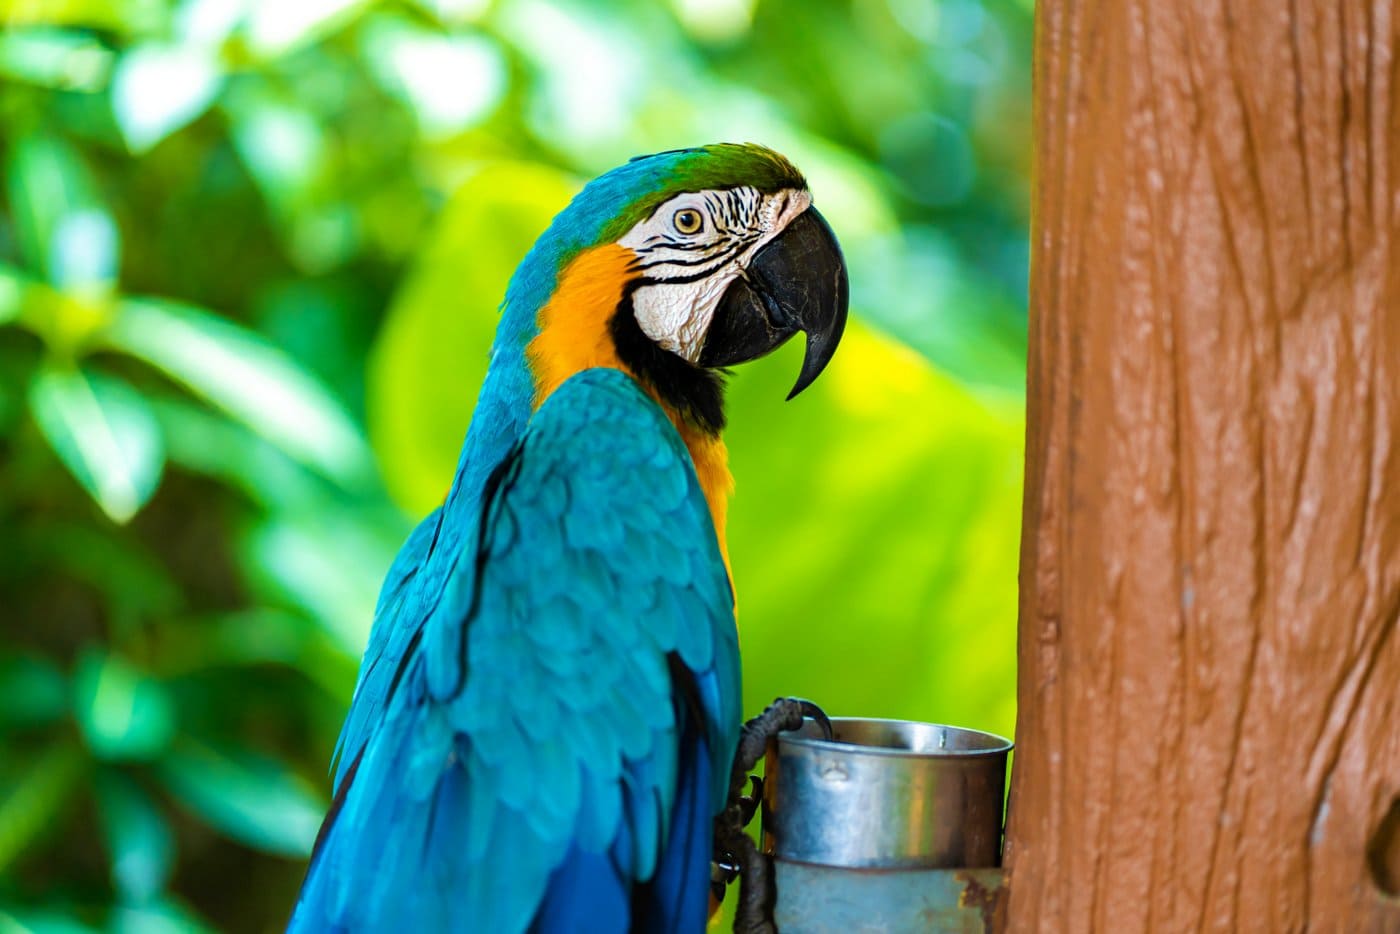 Blue yellow parrot macaw sitting on branch